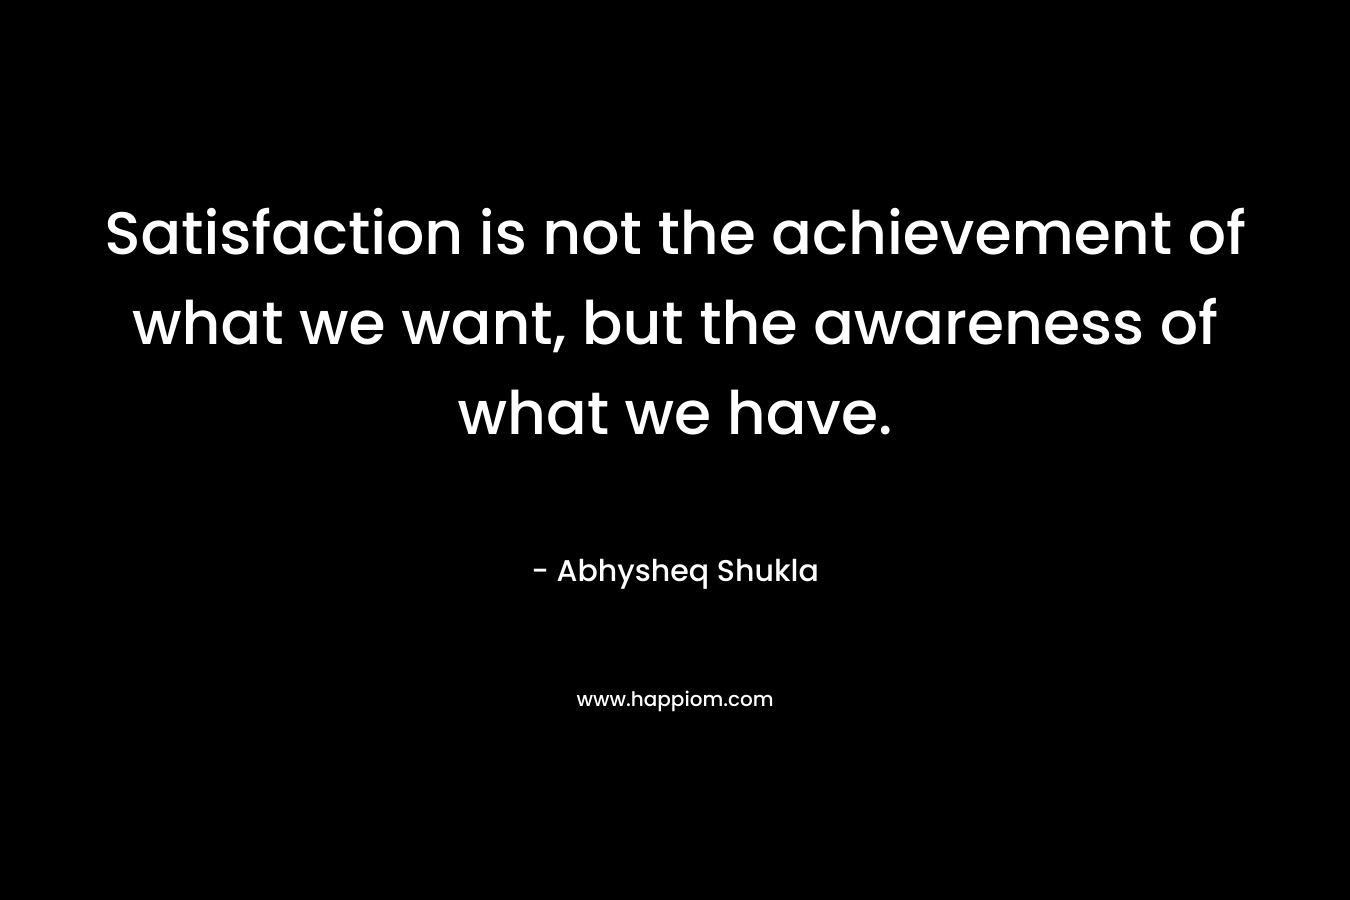 Satisfaction is not the achievement of what we want, but the awareness of what we have.